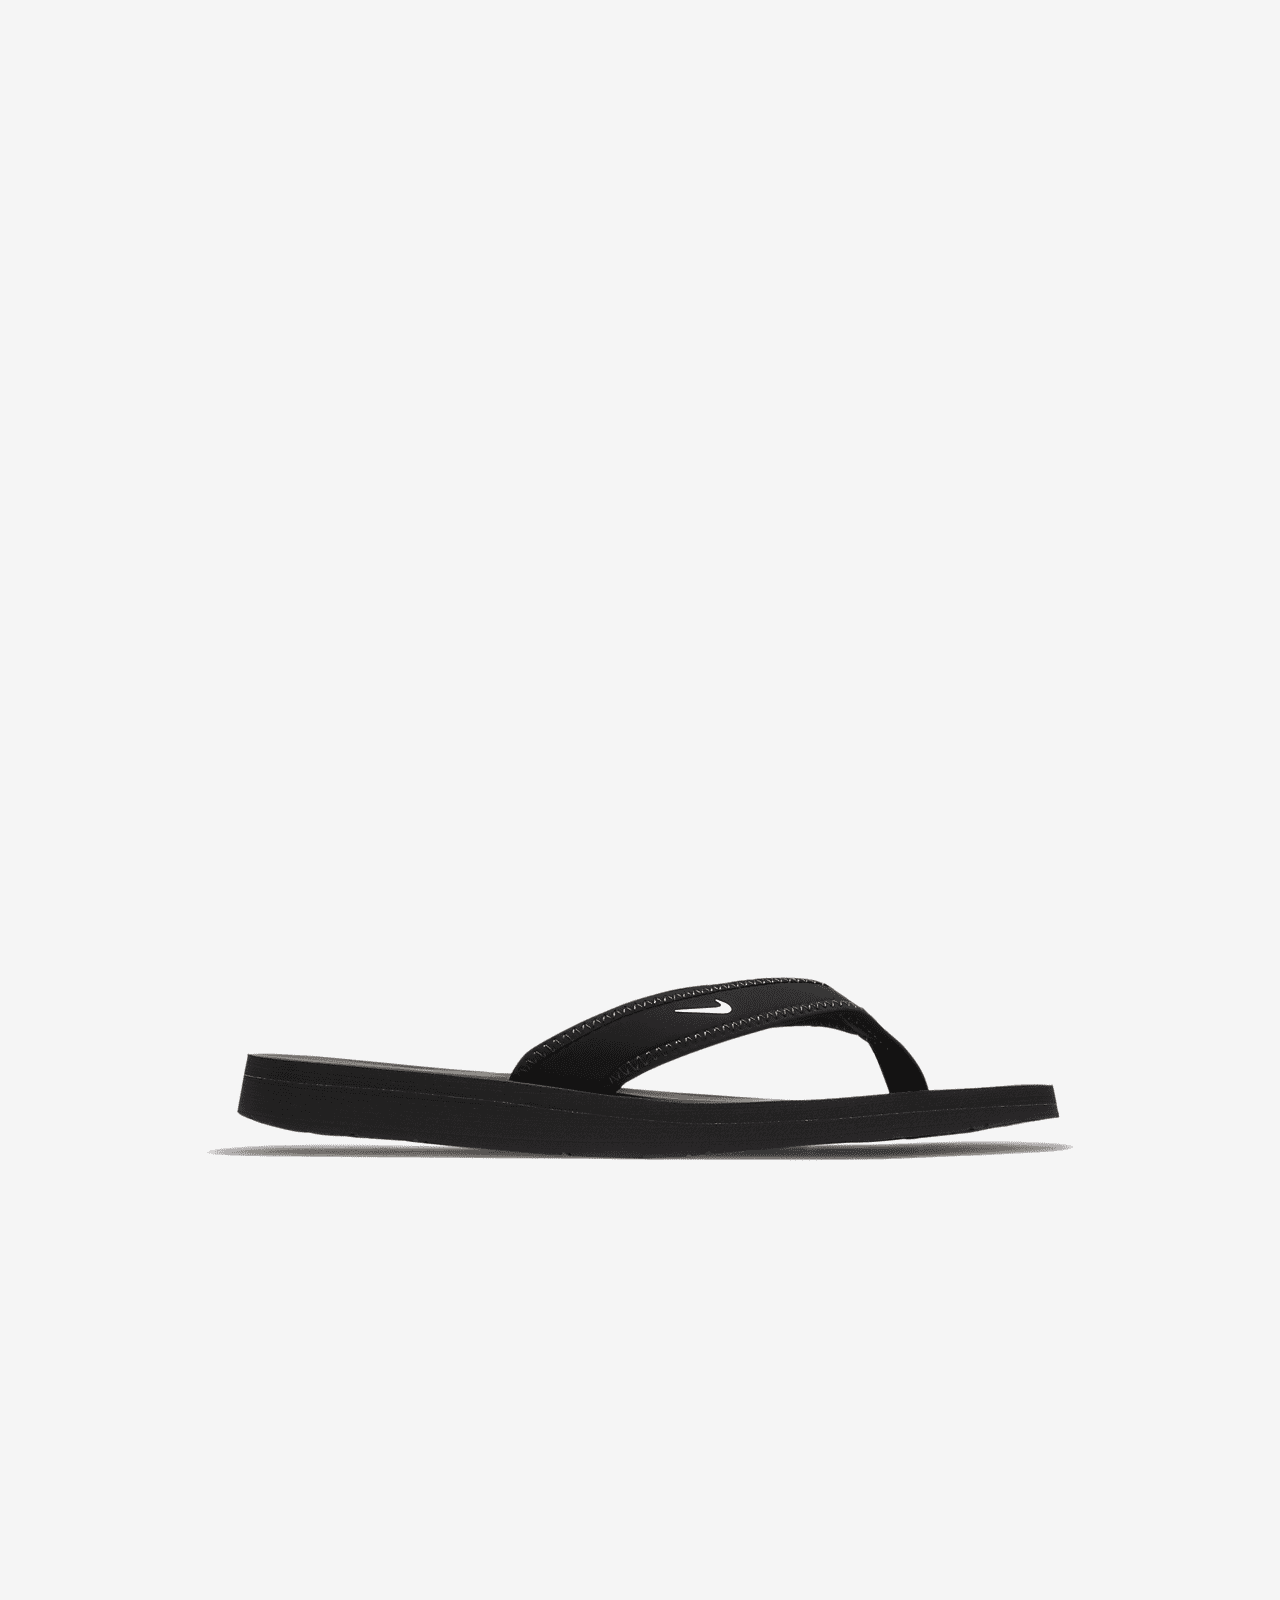 Nike Womens Ultra Celso Thong Flip Flop Review 